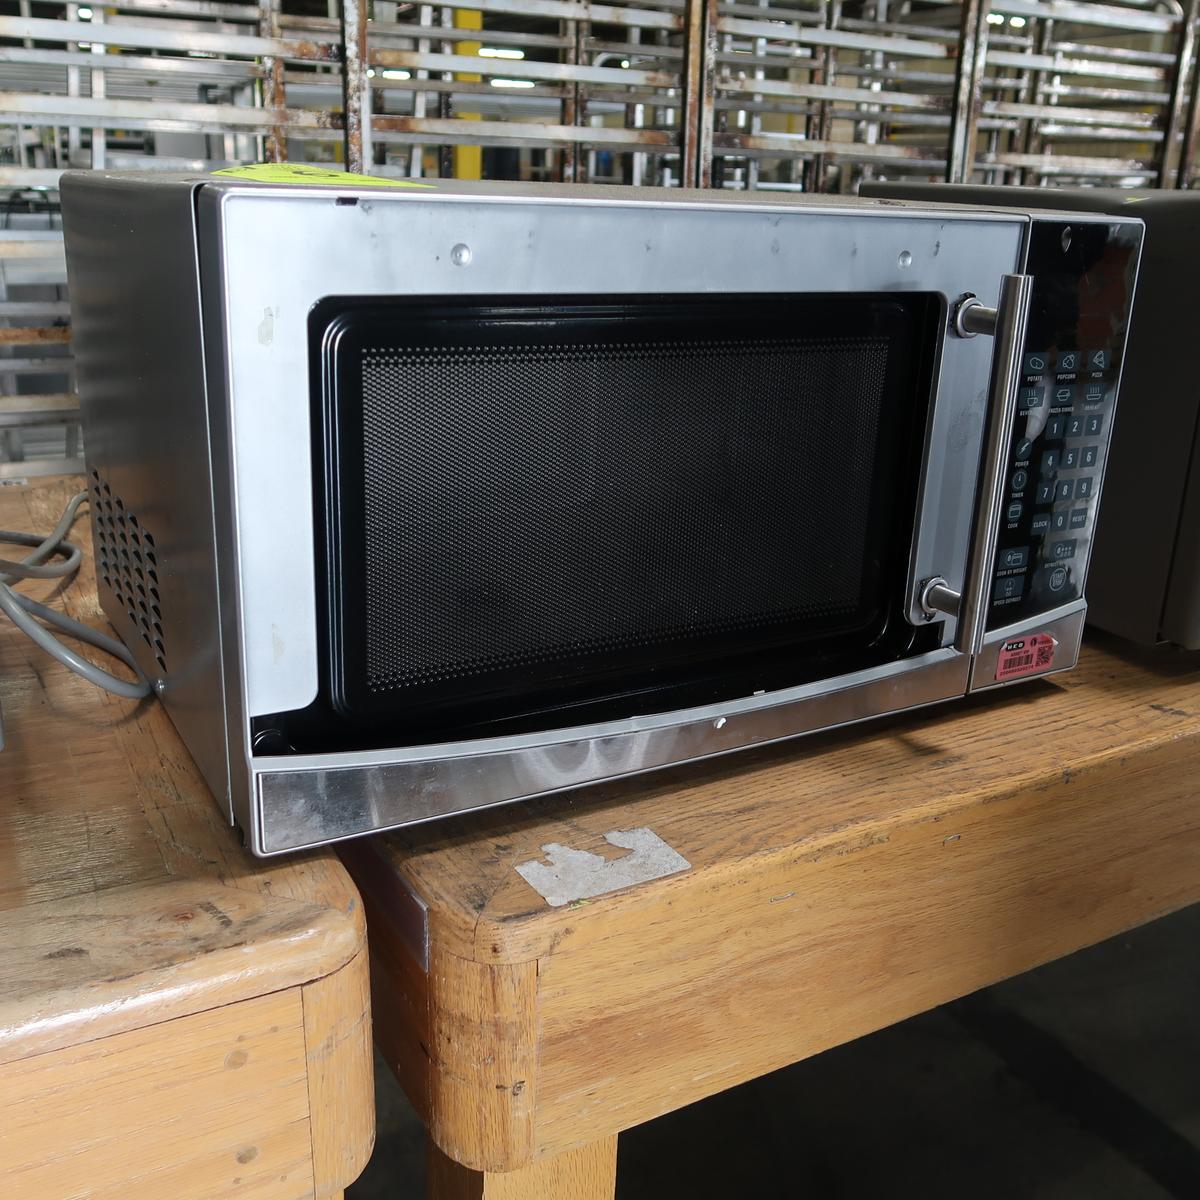 Oster microwave oven, 1000w, missing front glass